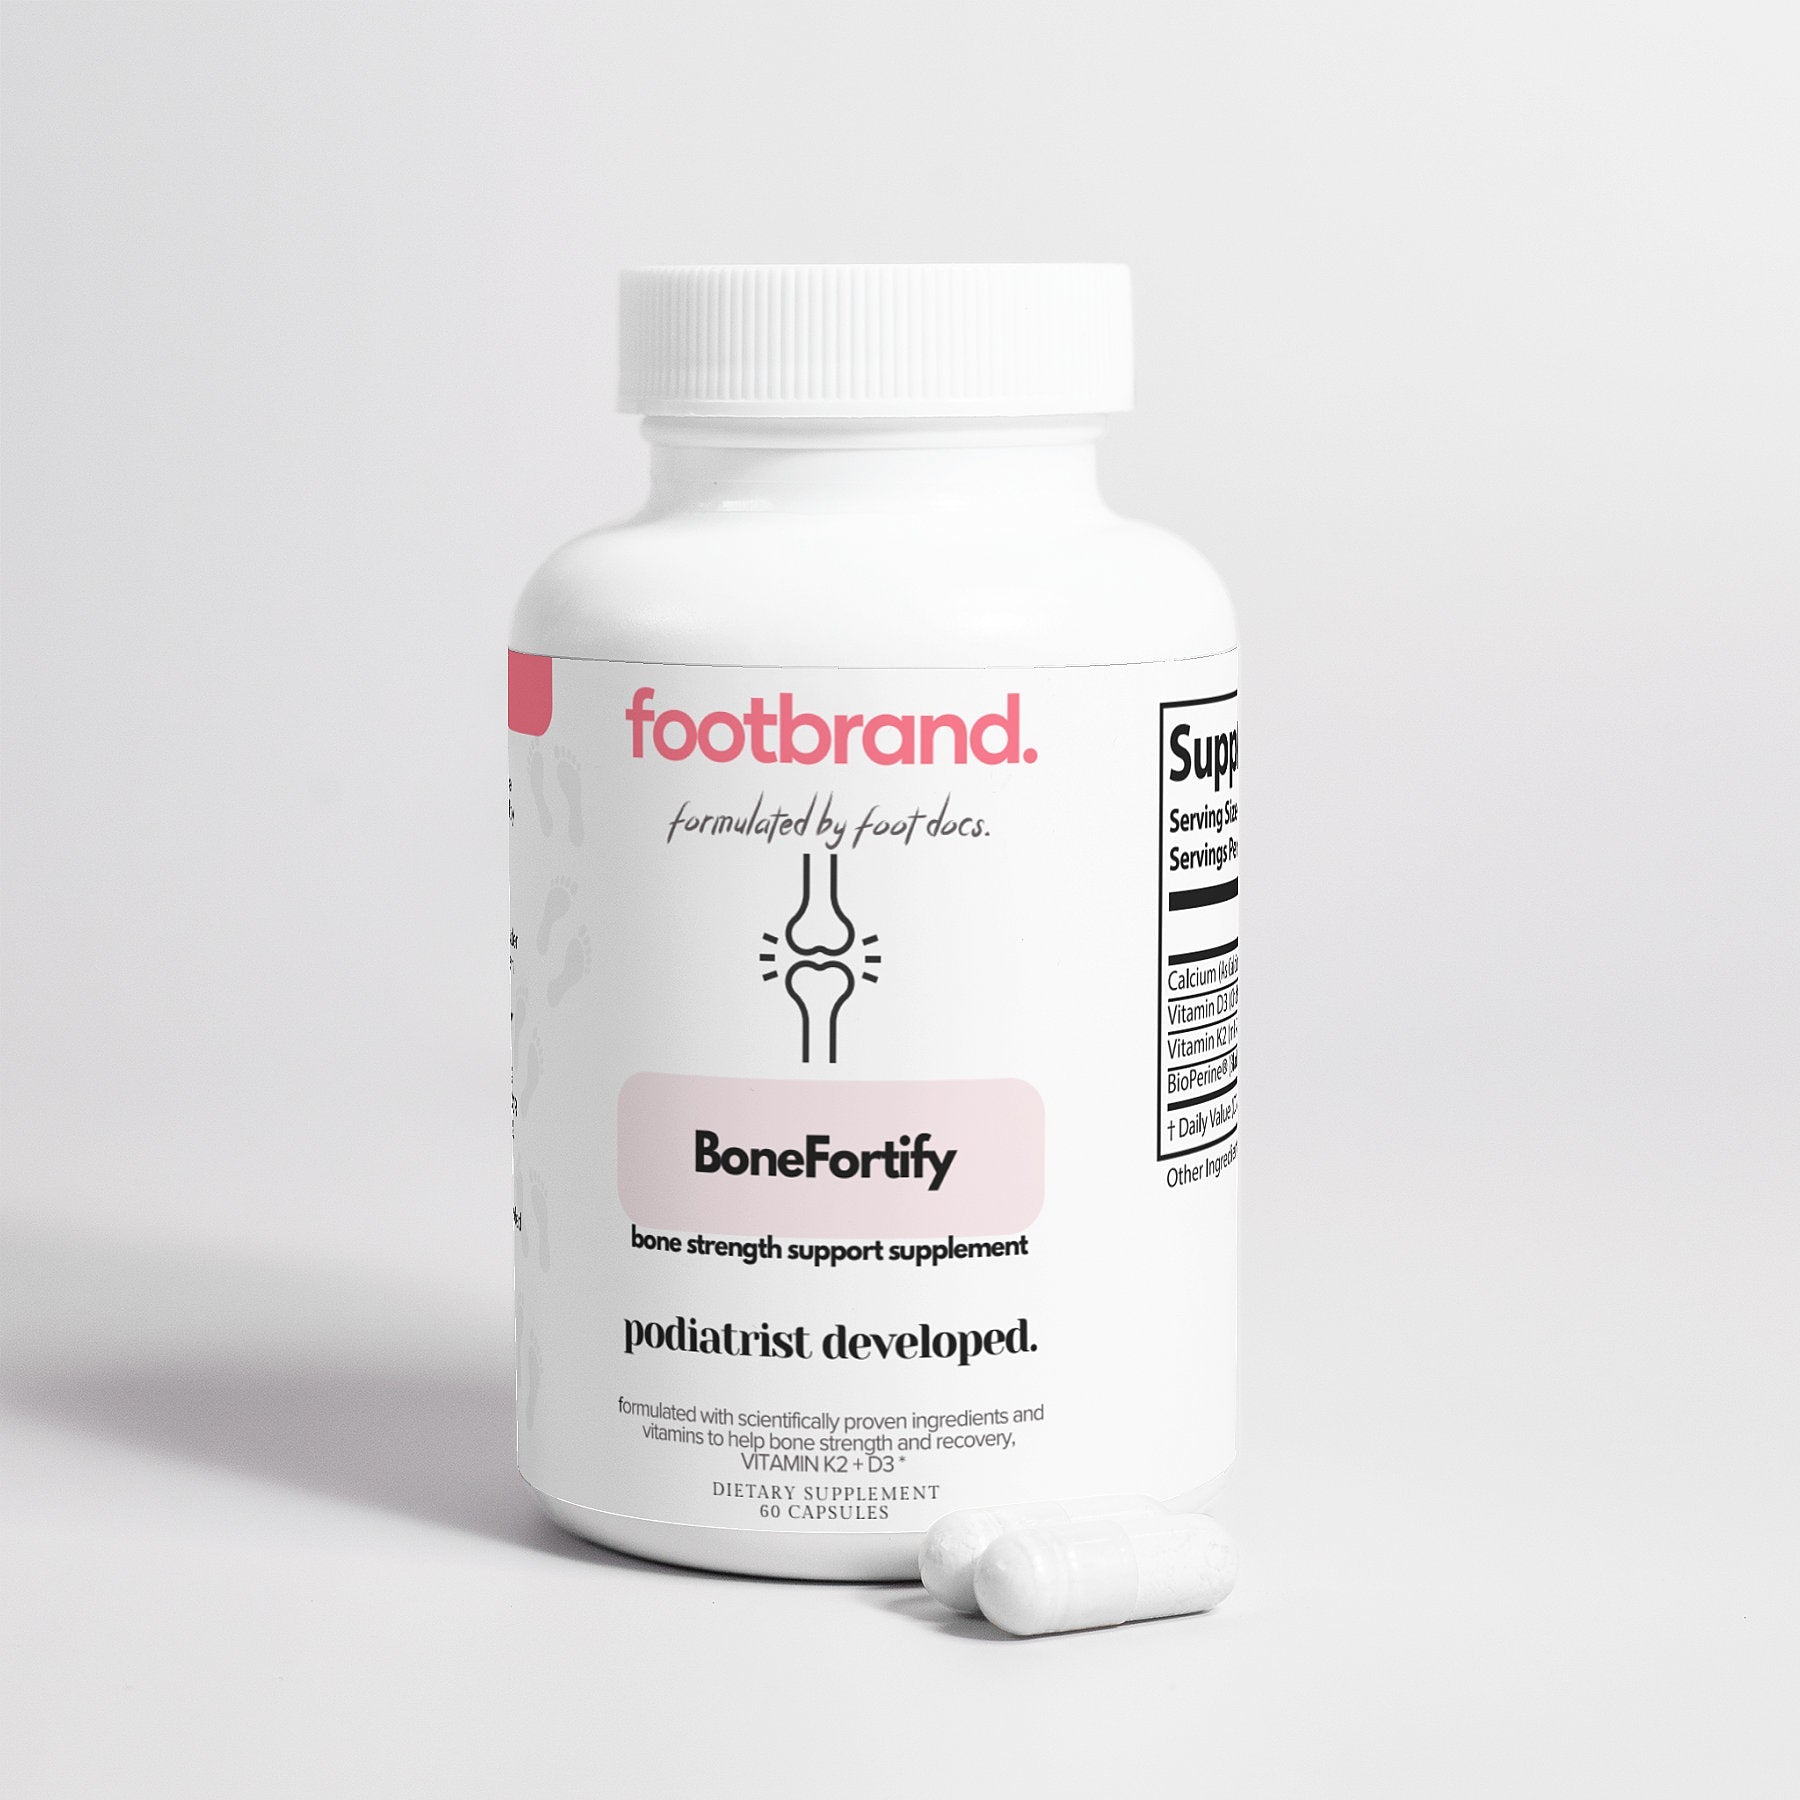 BoneFortify - Bone Strength Support Supplement - FootBrand | Products For Your Feet